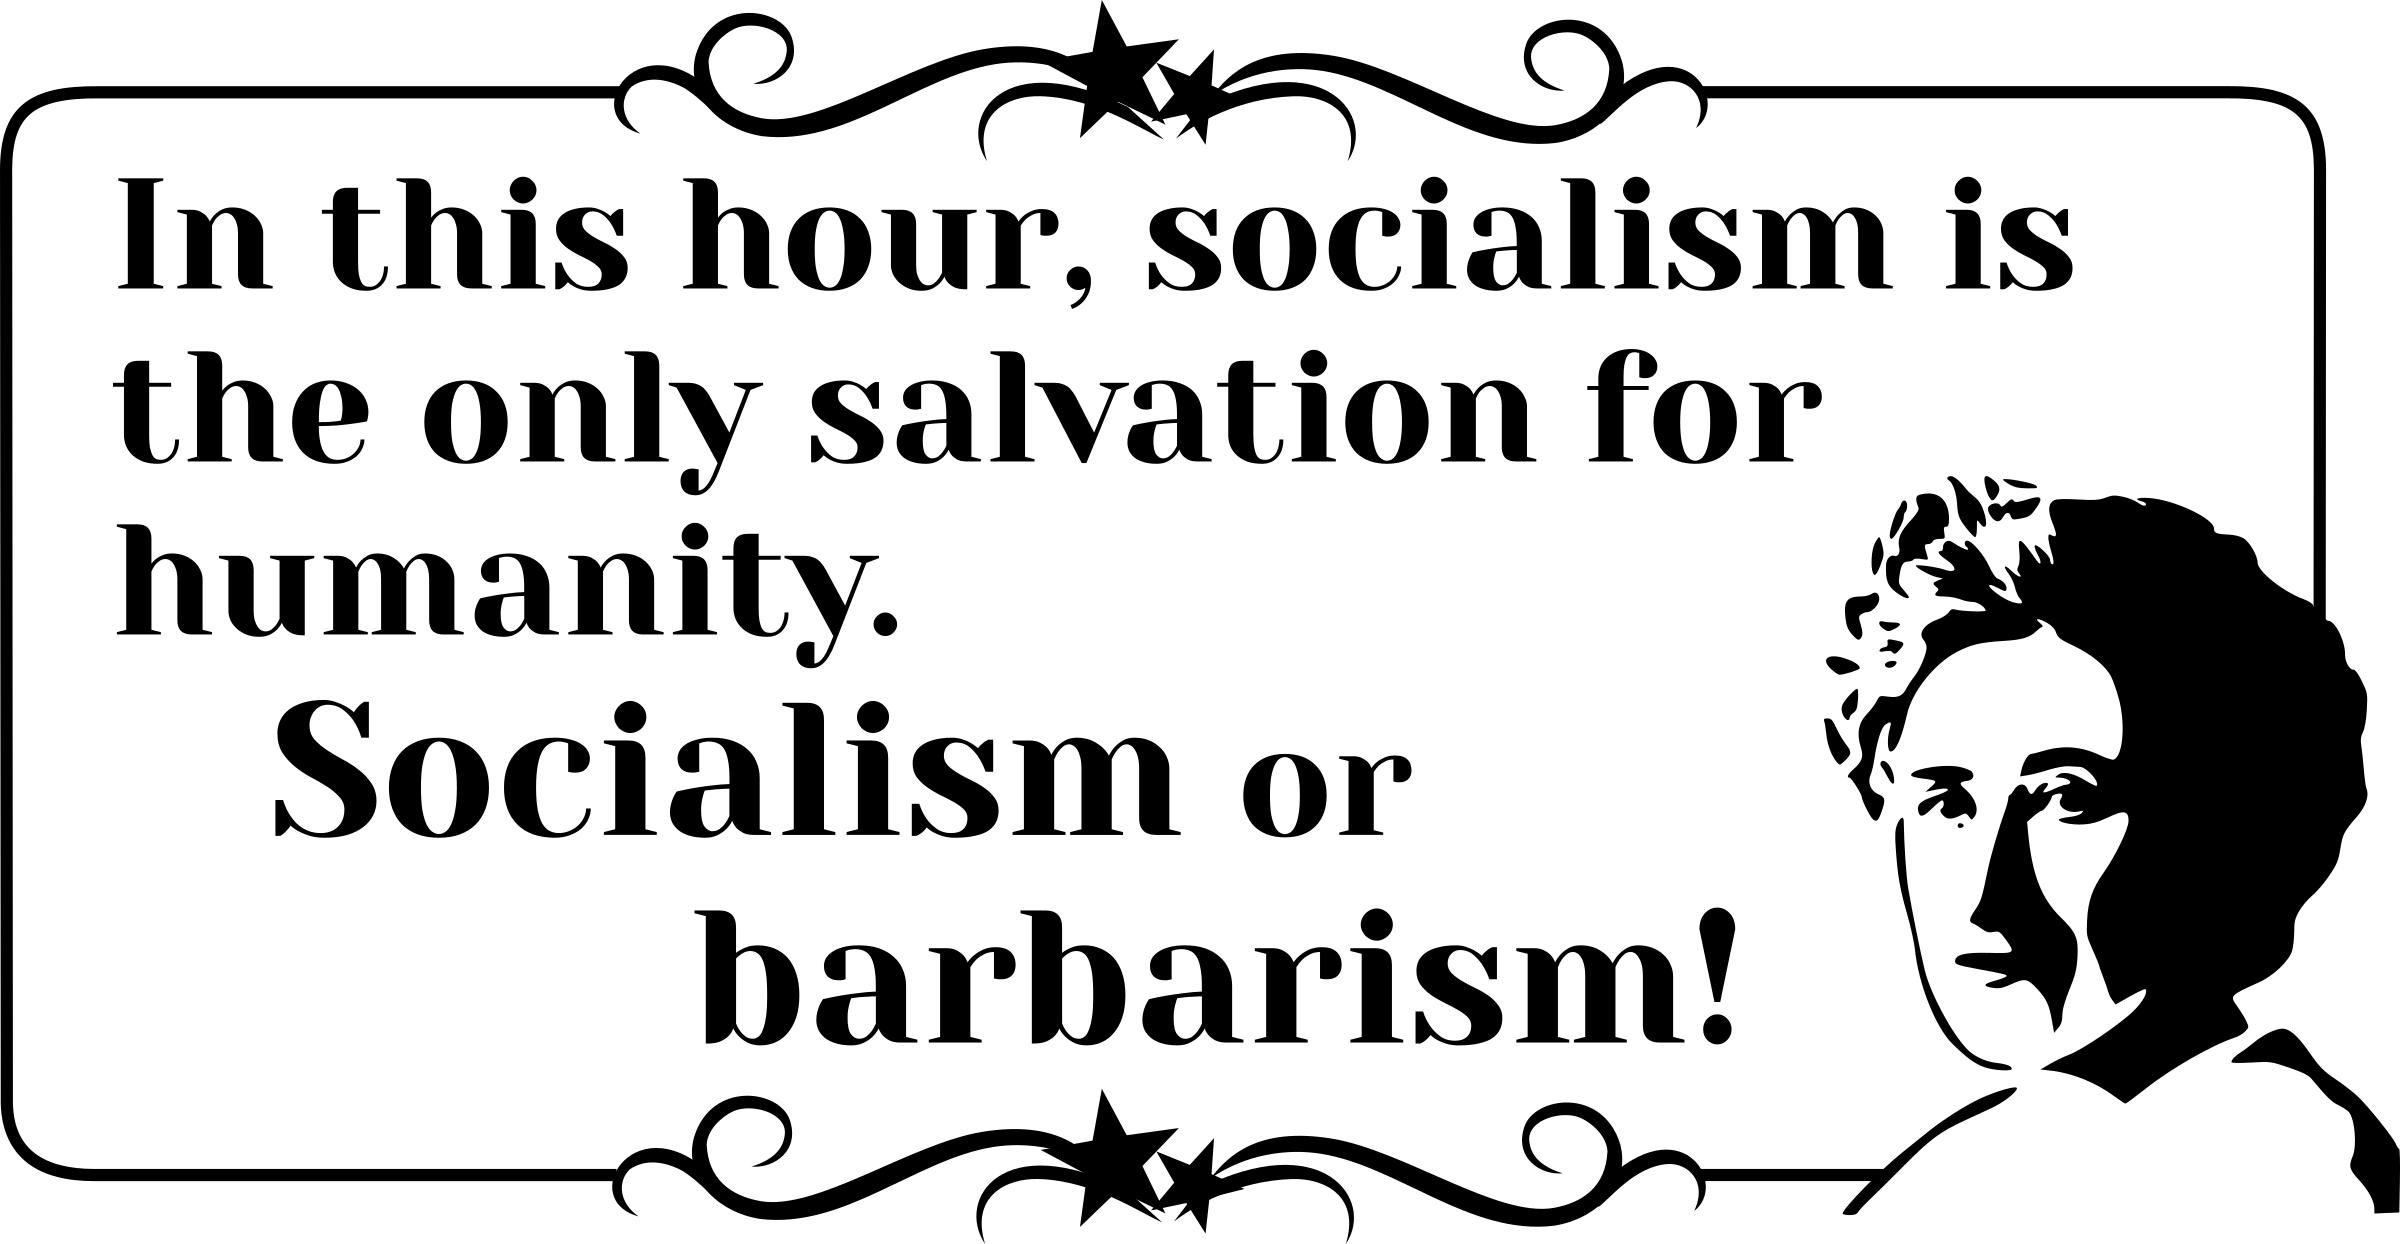 Rosa Luxemburg Quote Socialism or barbarism! png